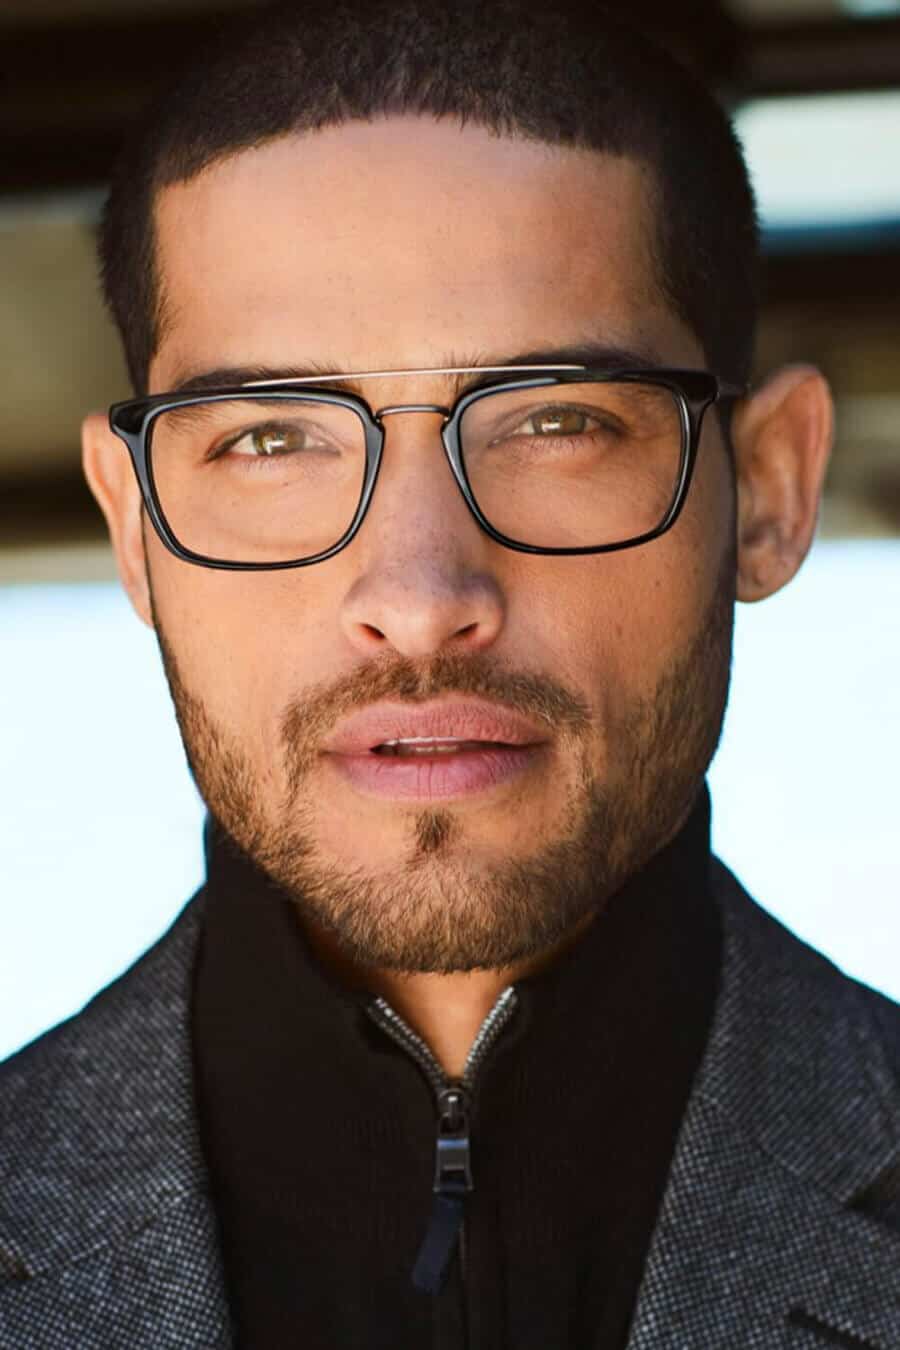 Men's brow bar glasses/spectacles trend